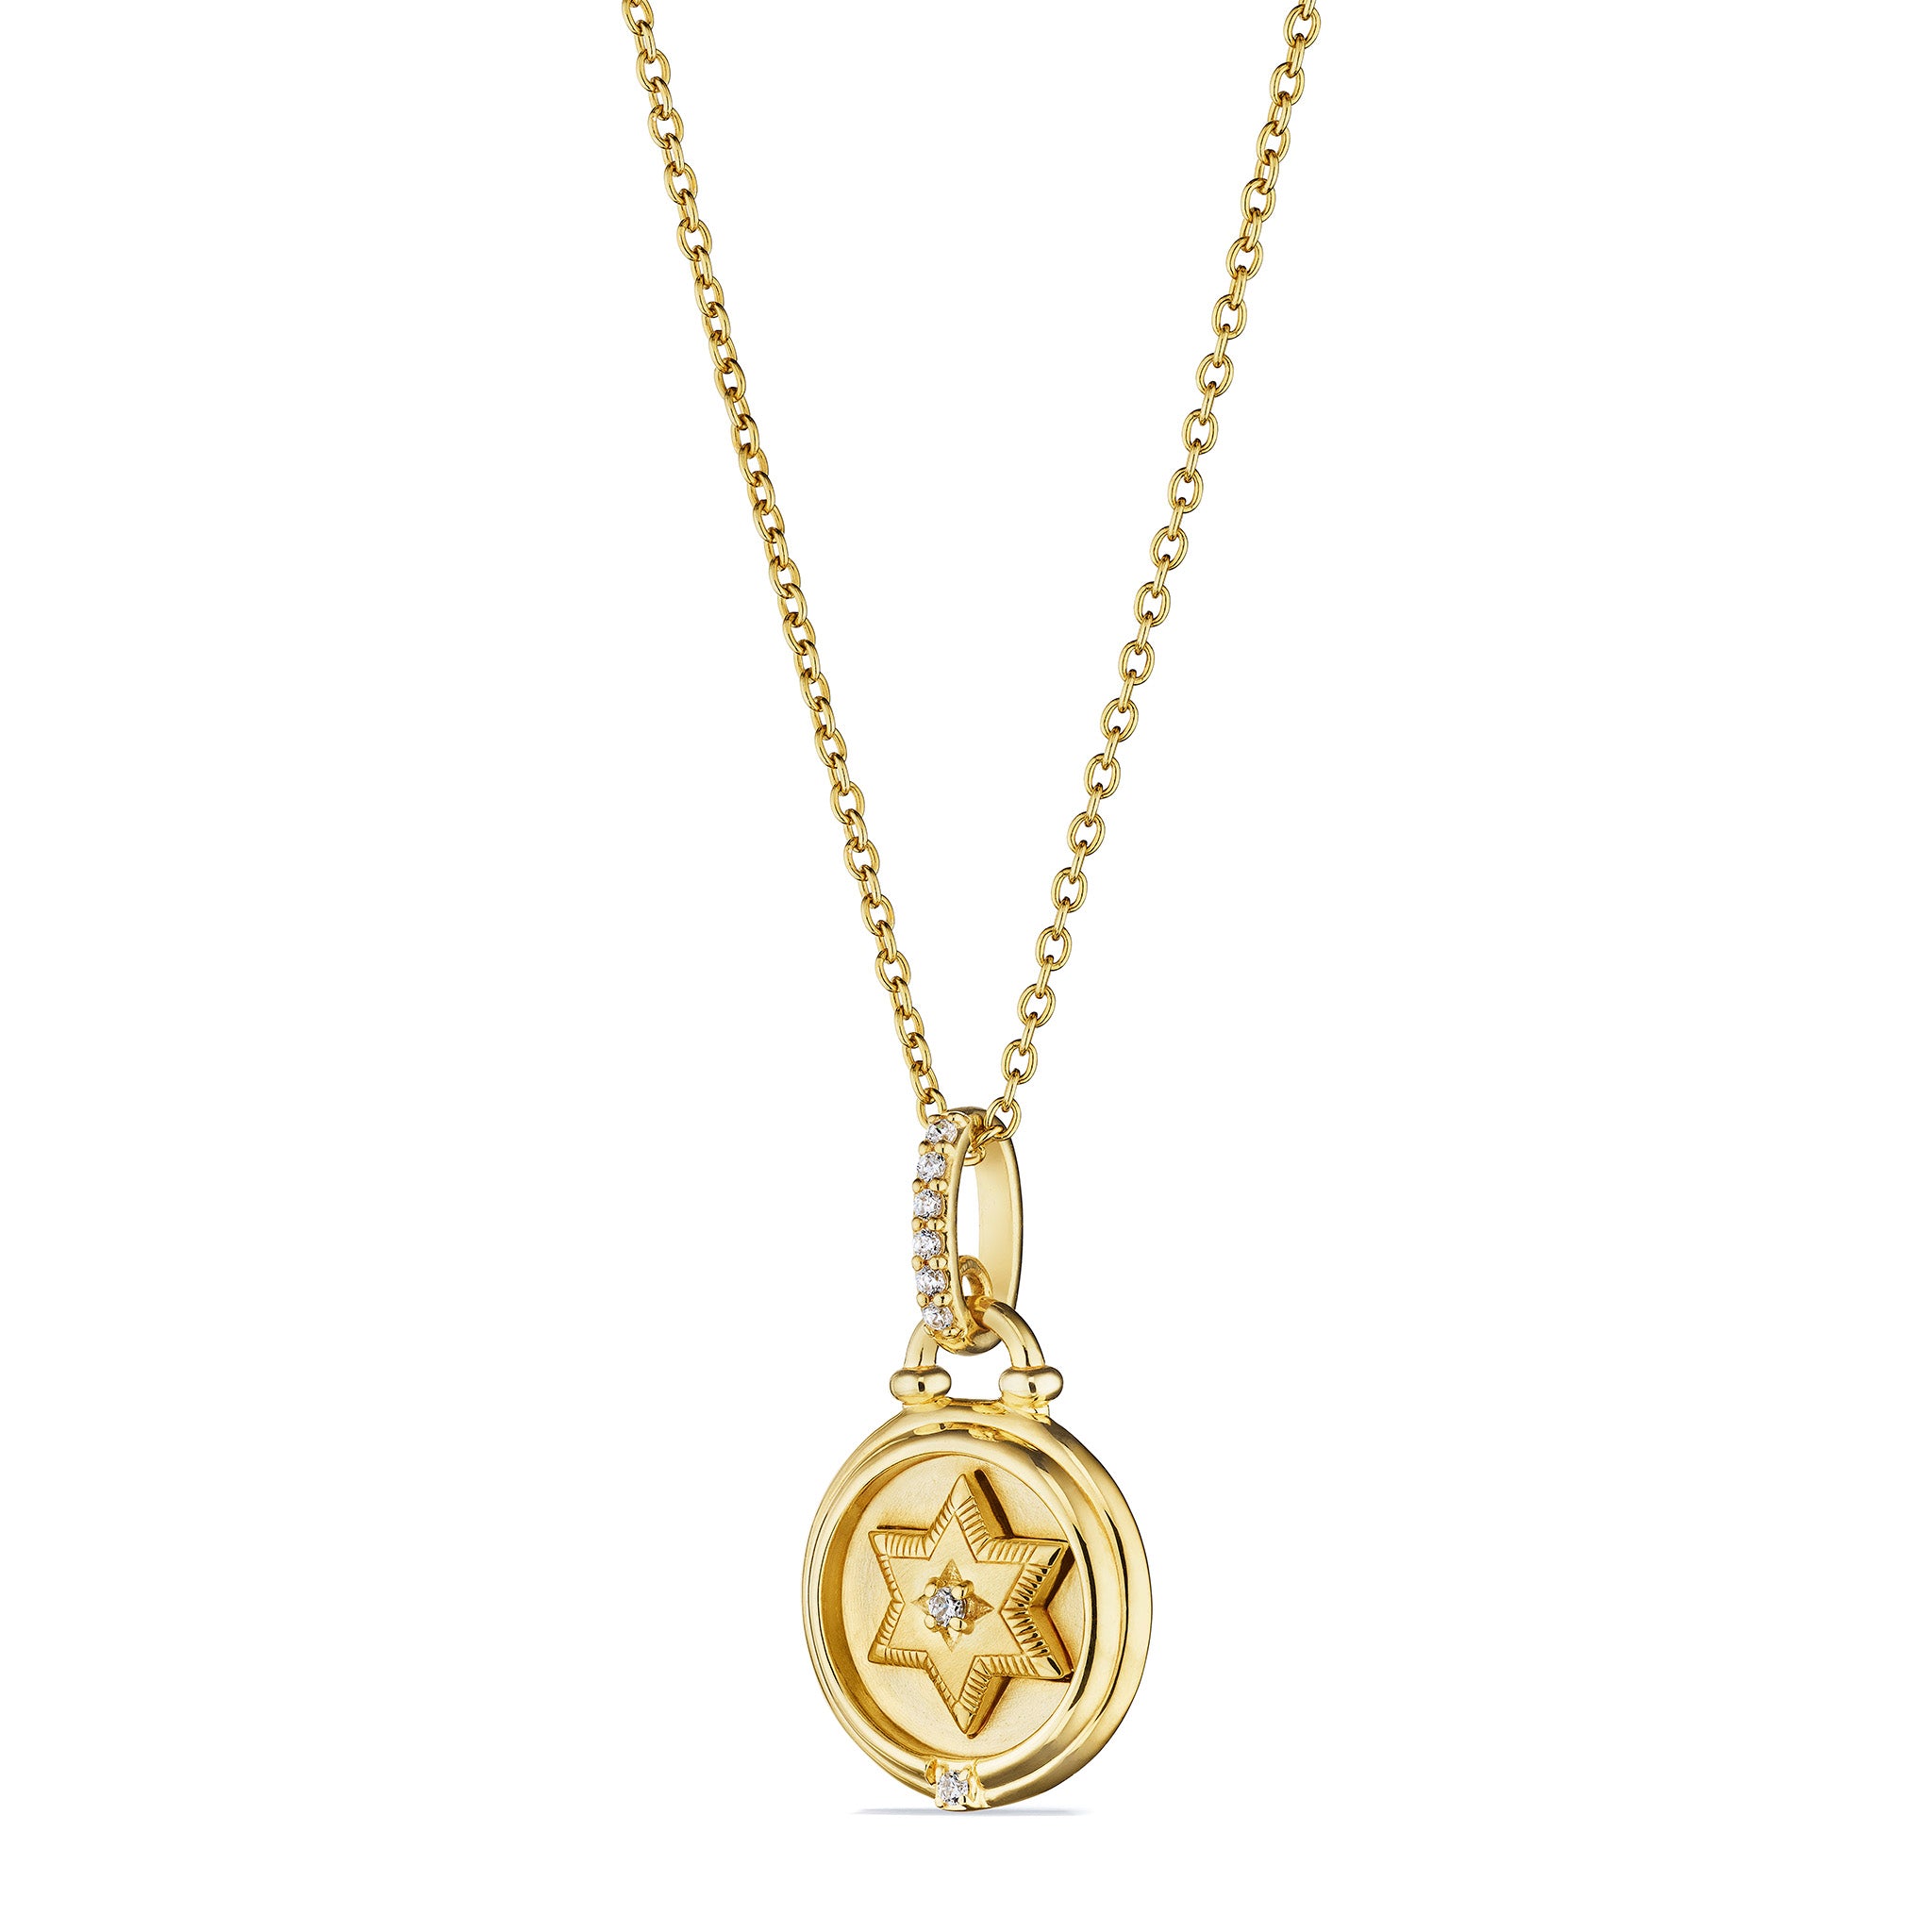 Little Luxuries Star of David Medallion Necklace with Diamonds in 18K